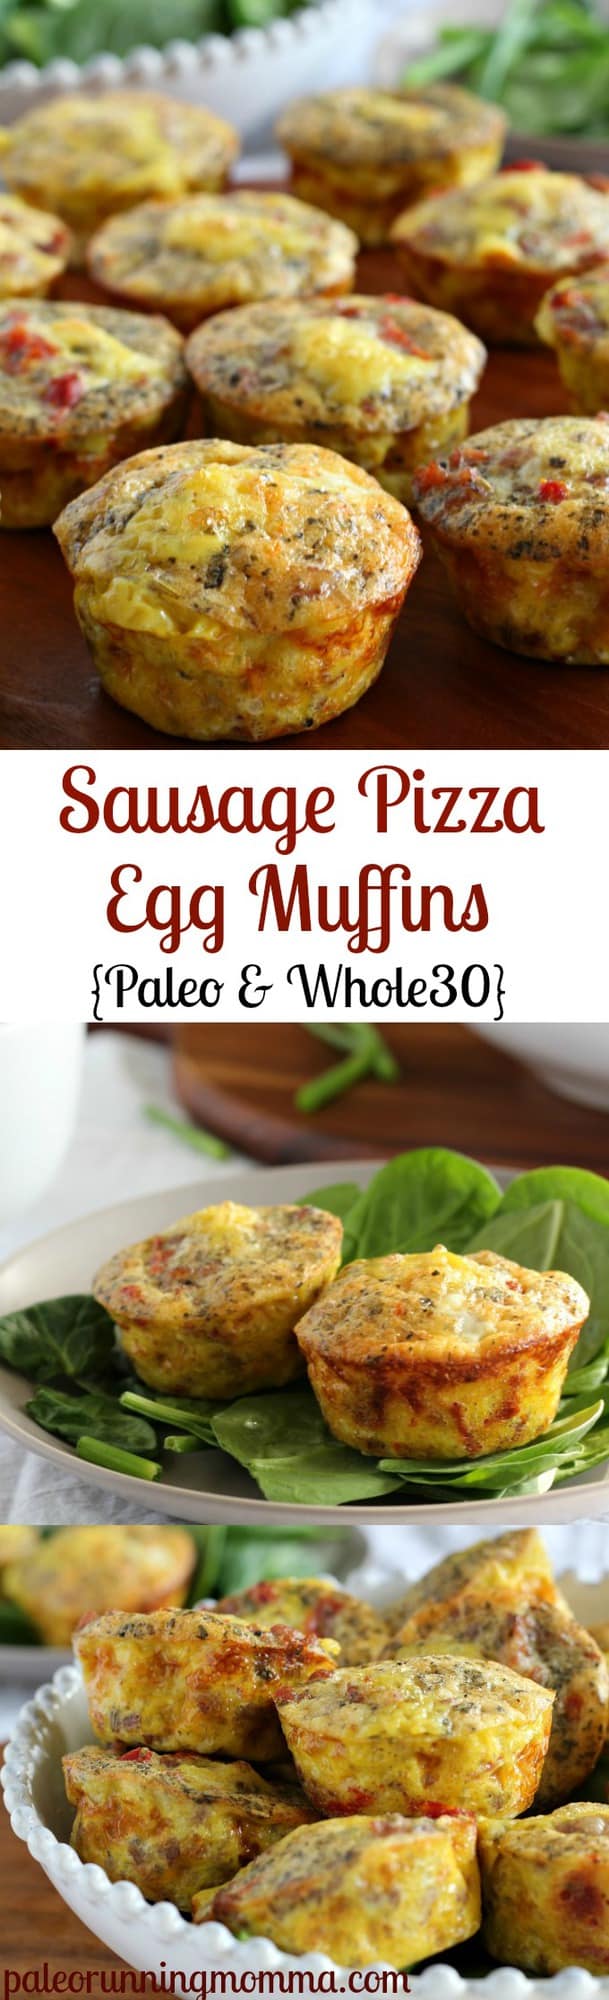 Sausage Pizza Egg Muffins {Paleo and Whole30} - easy paleo, whole30, and low carb breakfast or brunch - great to make ahead!